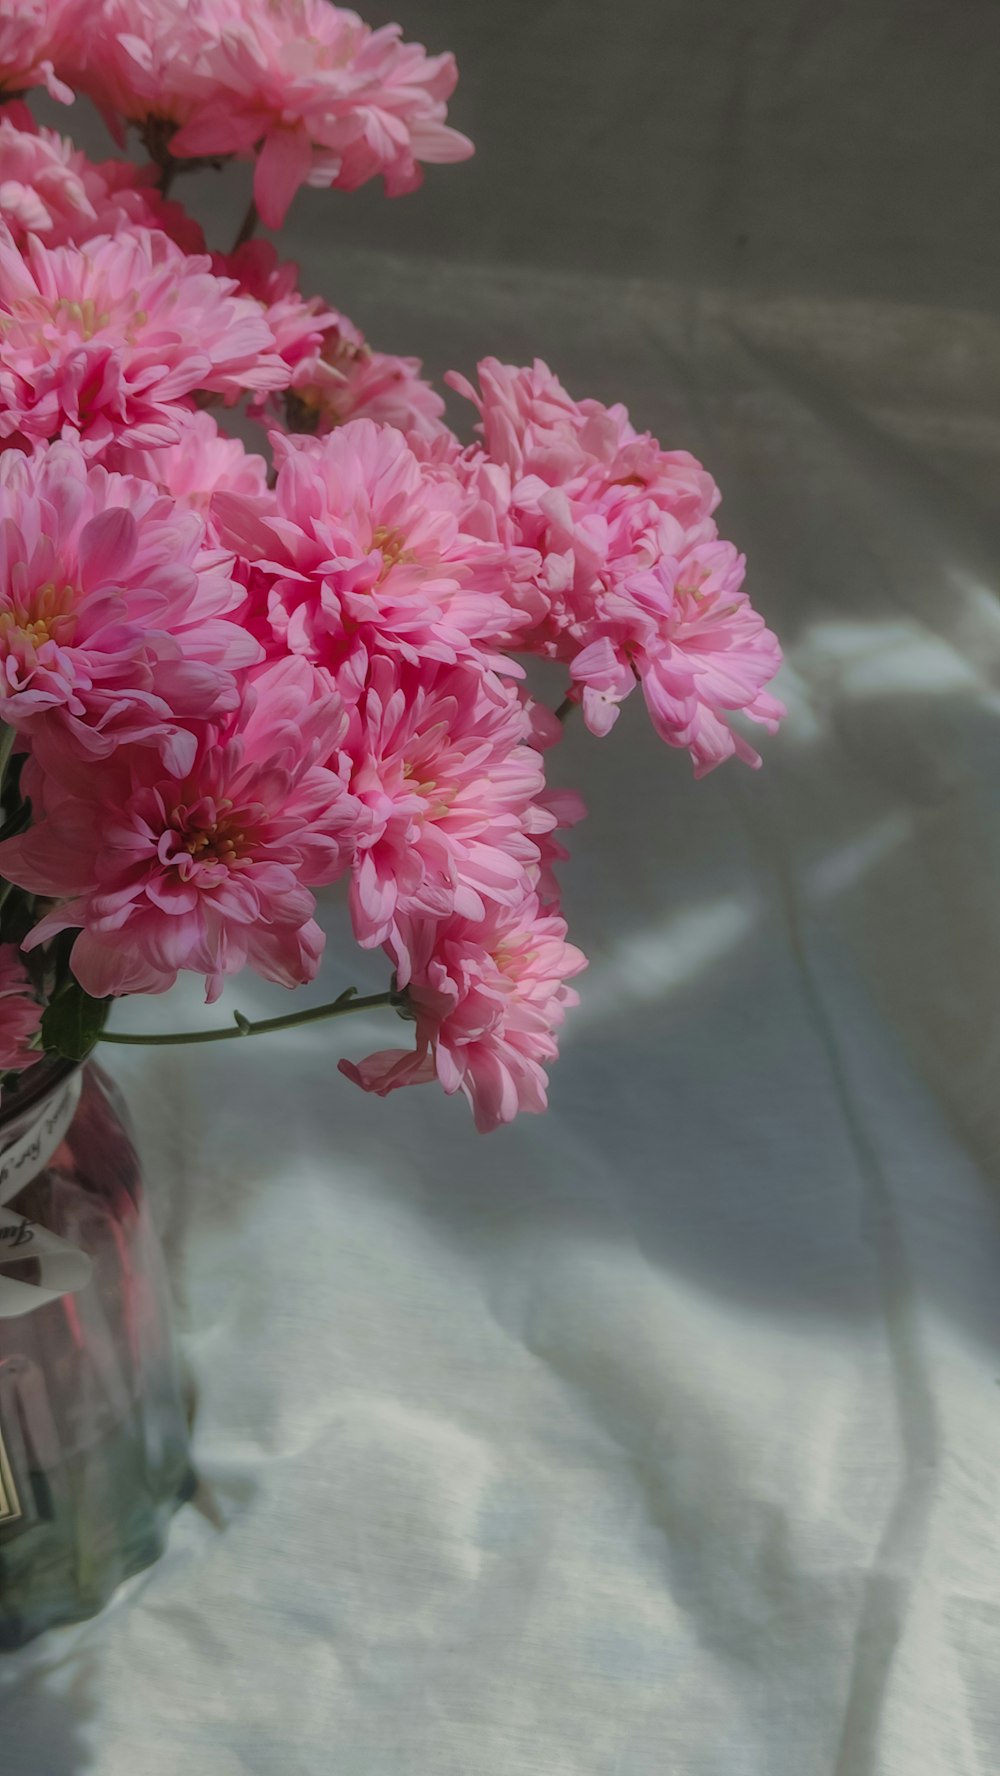 a glass vase filled with pink flowers on a table